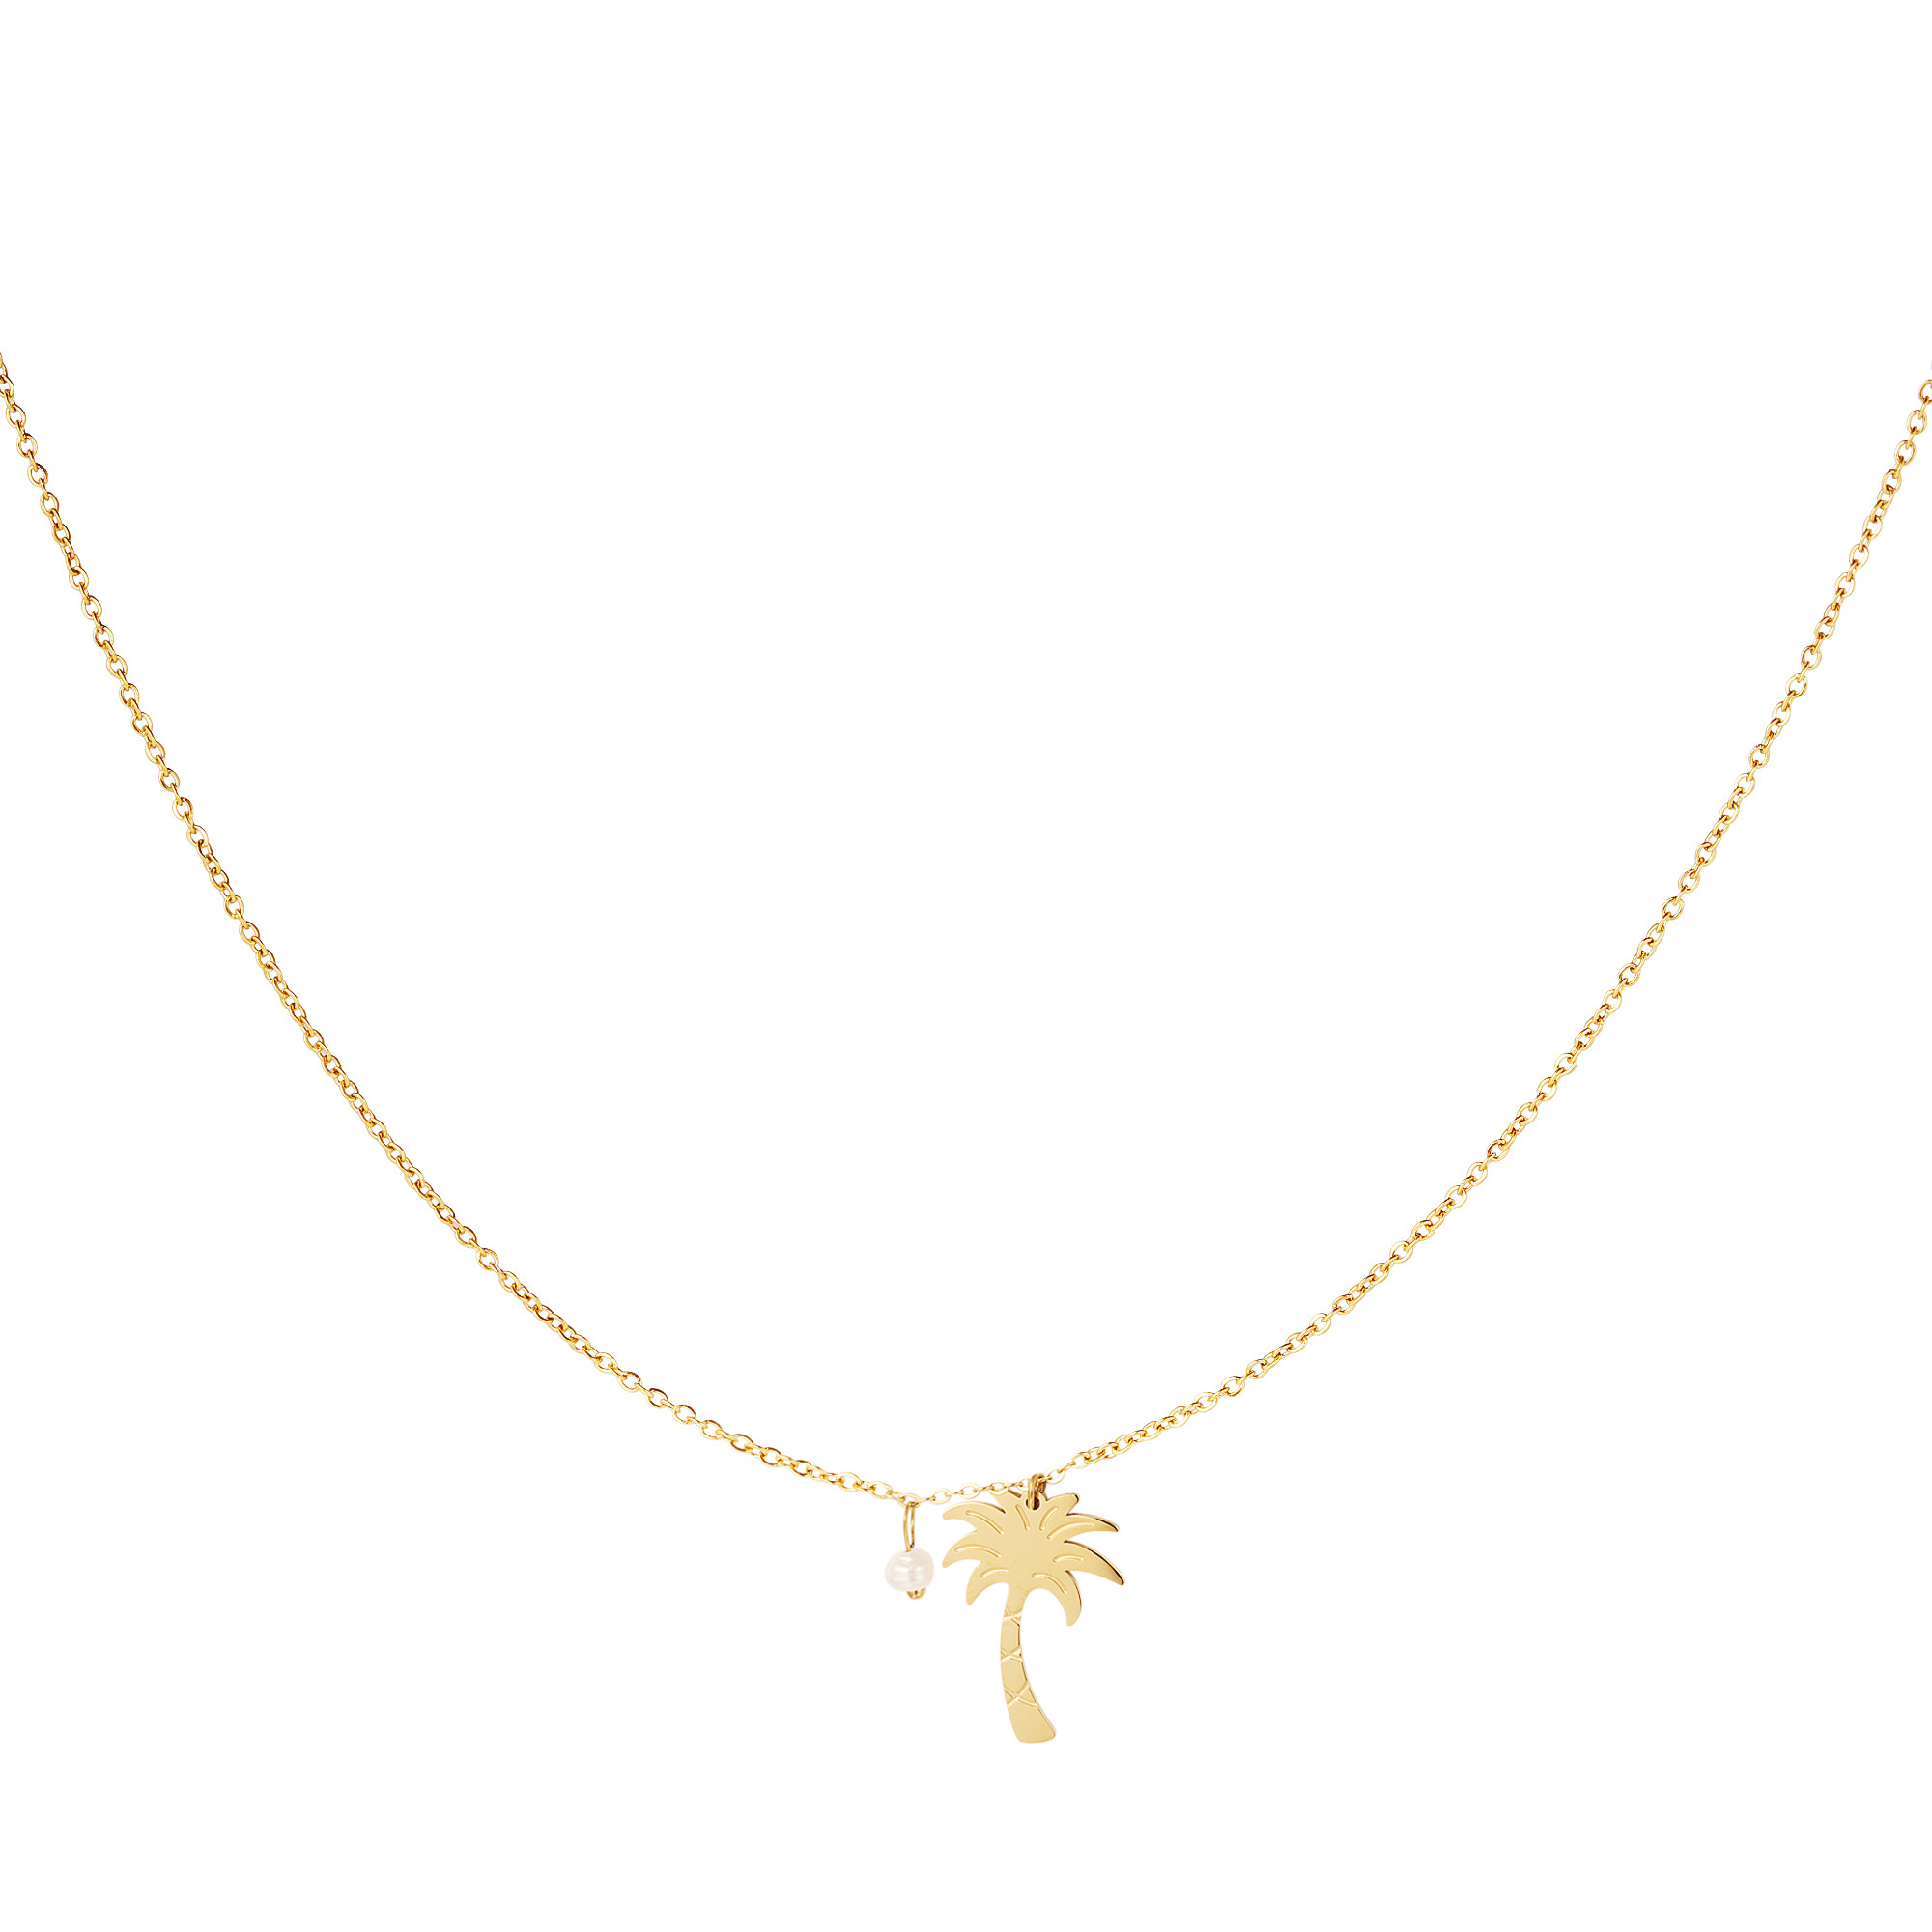 Necklace palm tree - Beach collection